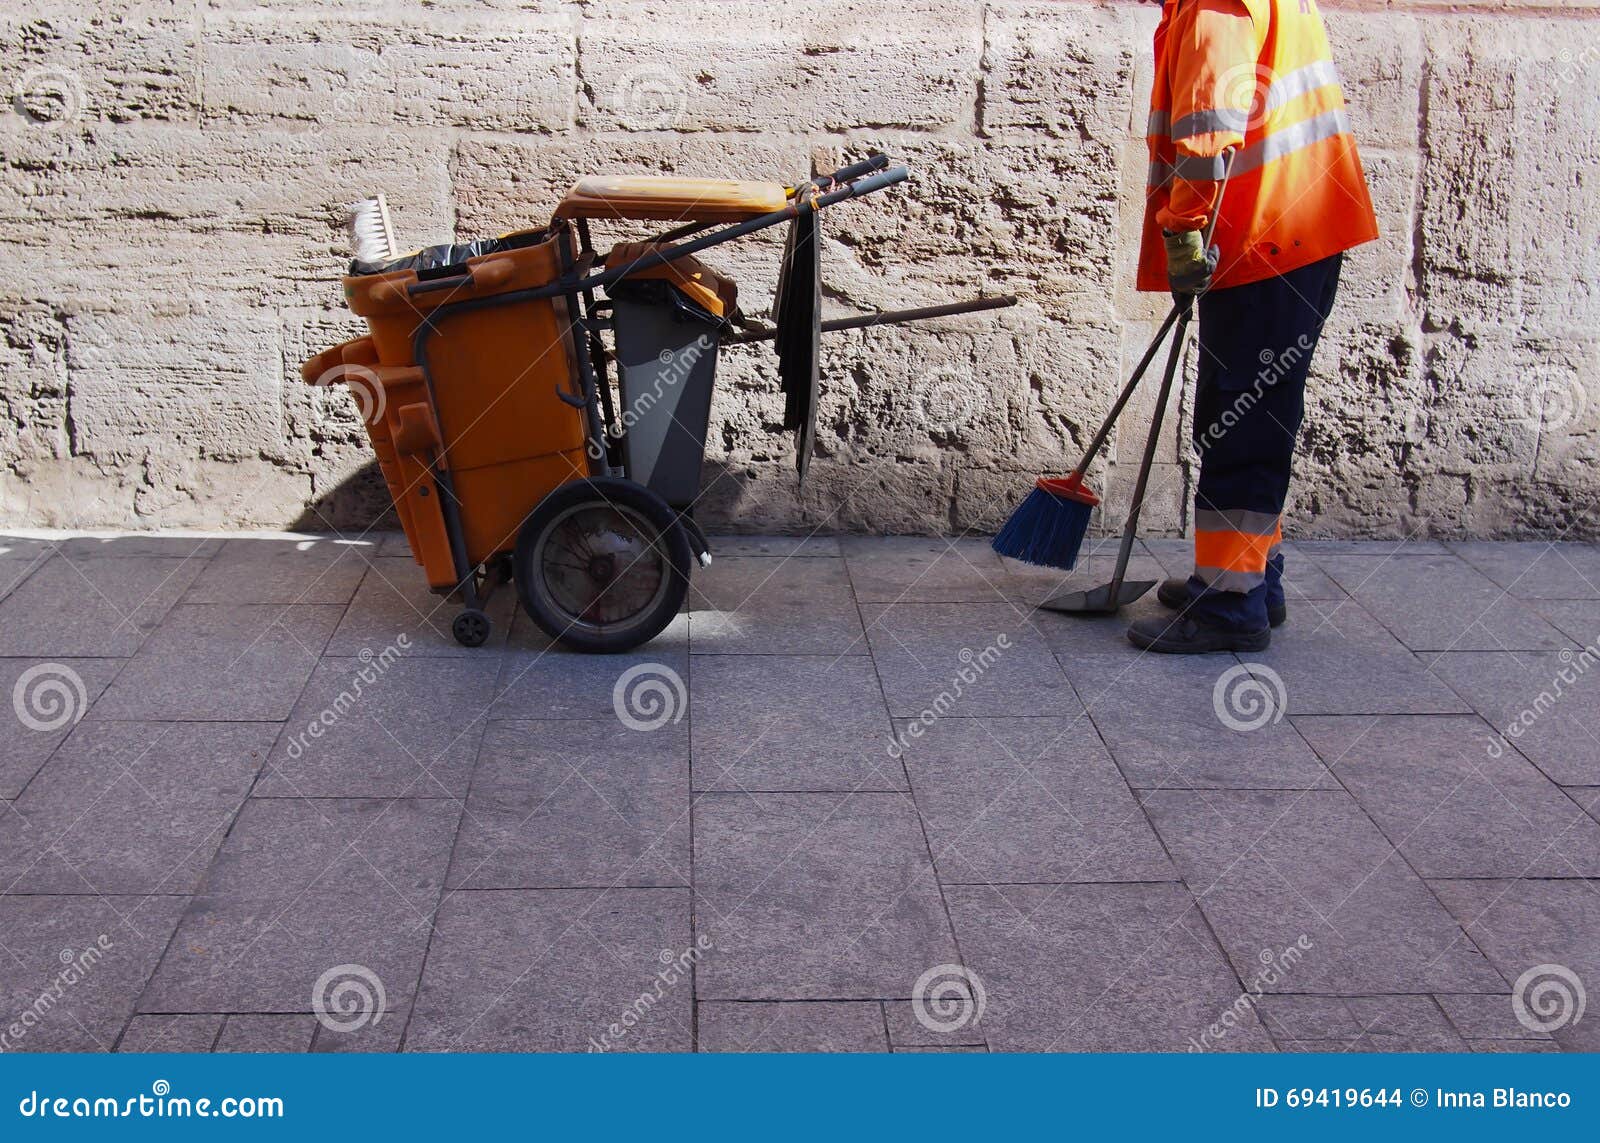 city workers - cleaning and washing of city streets